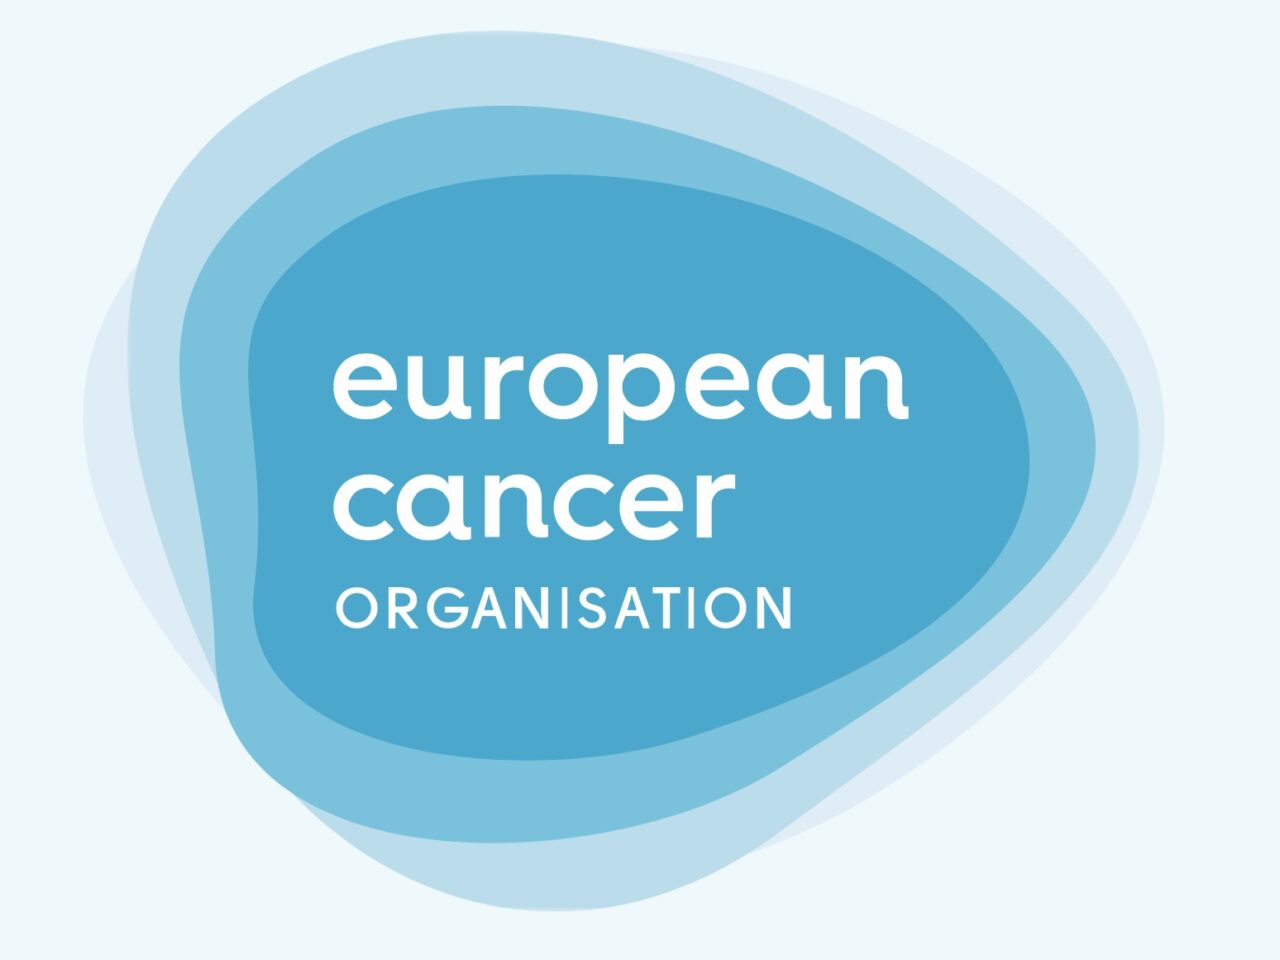 Use Your Vote in the upcoming European Elections to improve cancer care for everyone – European Cancer Organisation